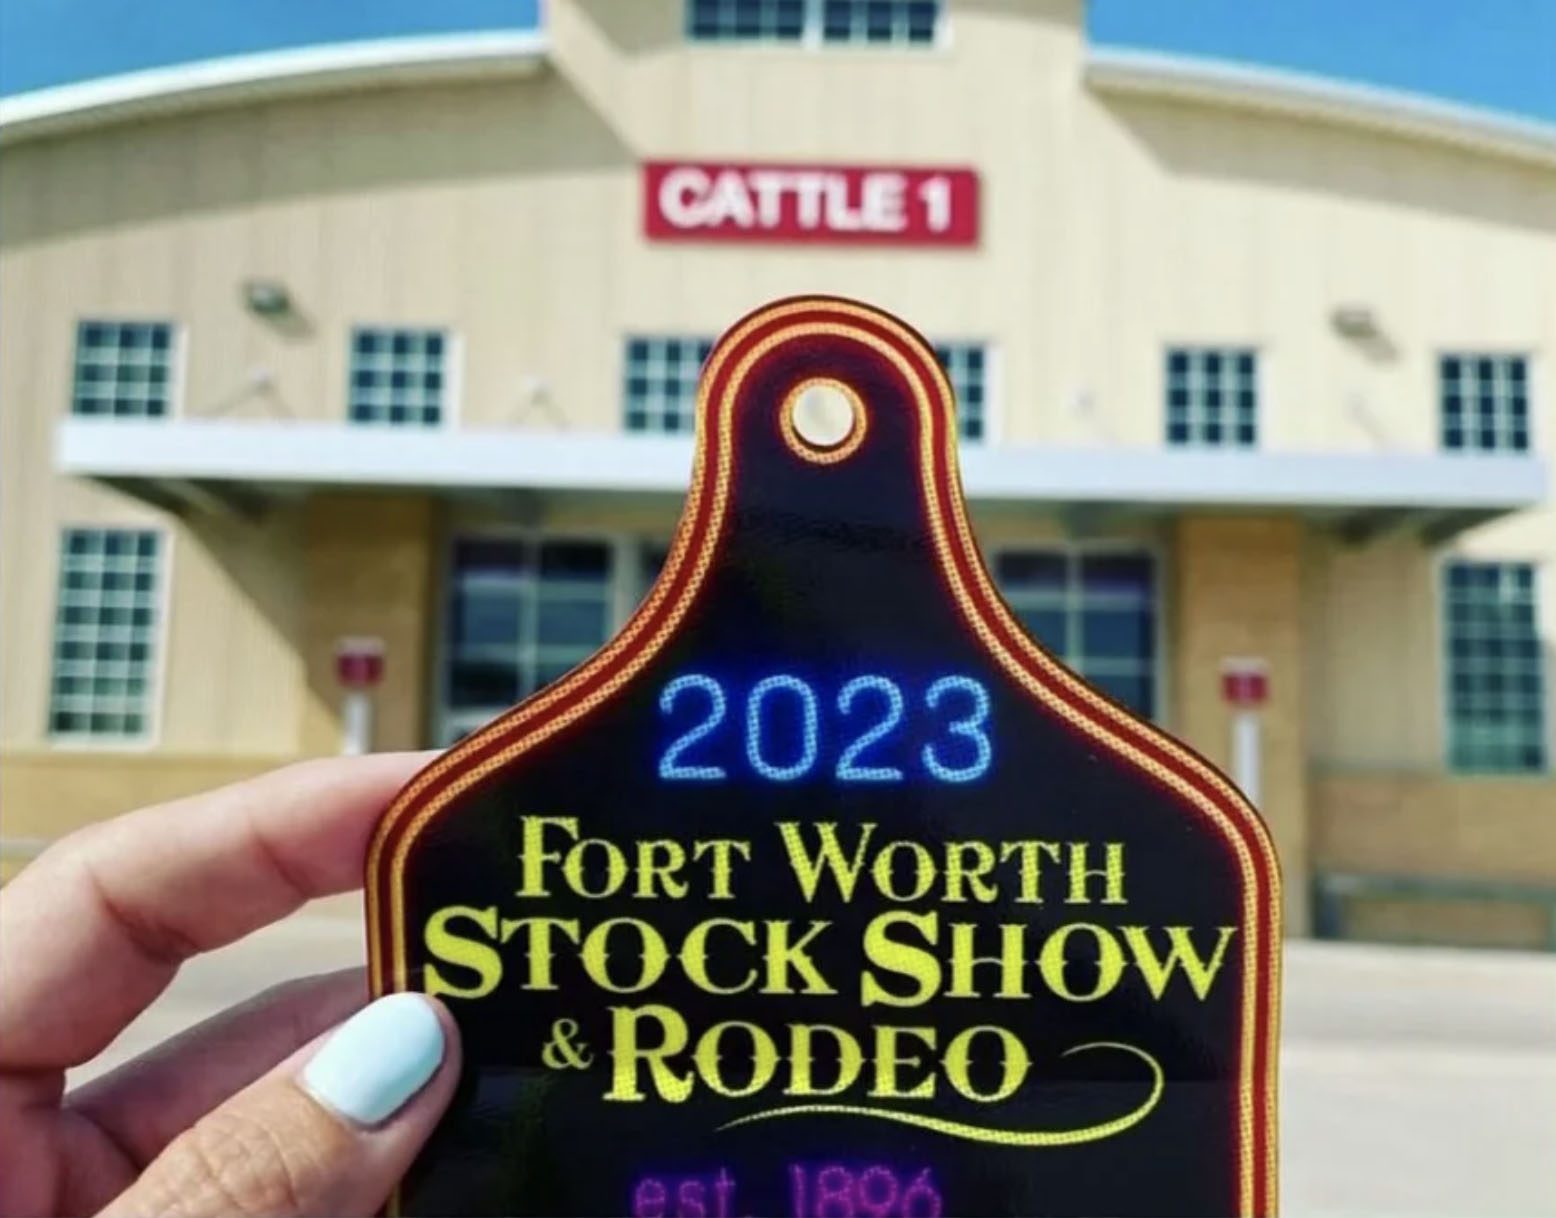 2023 Fort Worth Stock Show and Rodeo Tickets Available